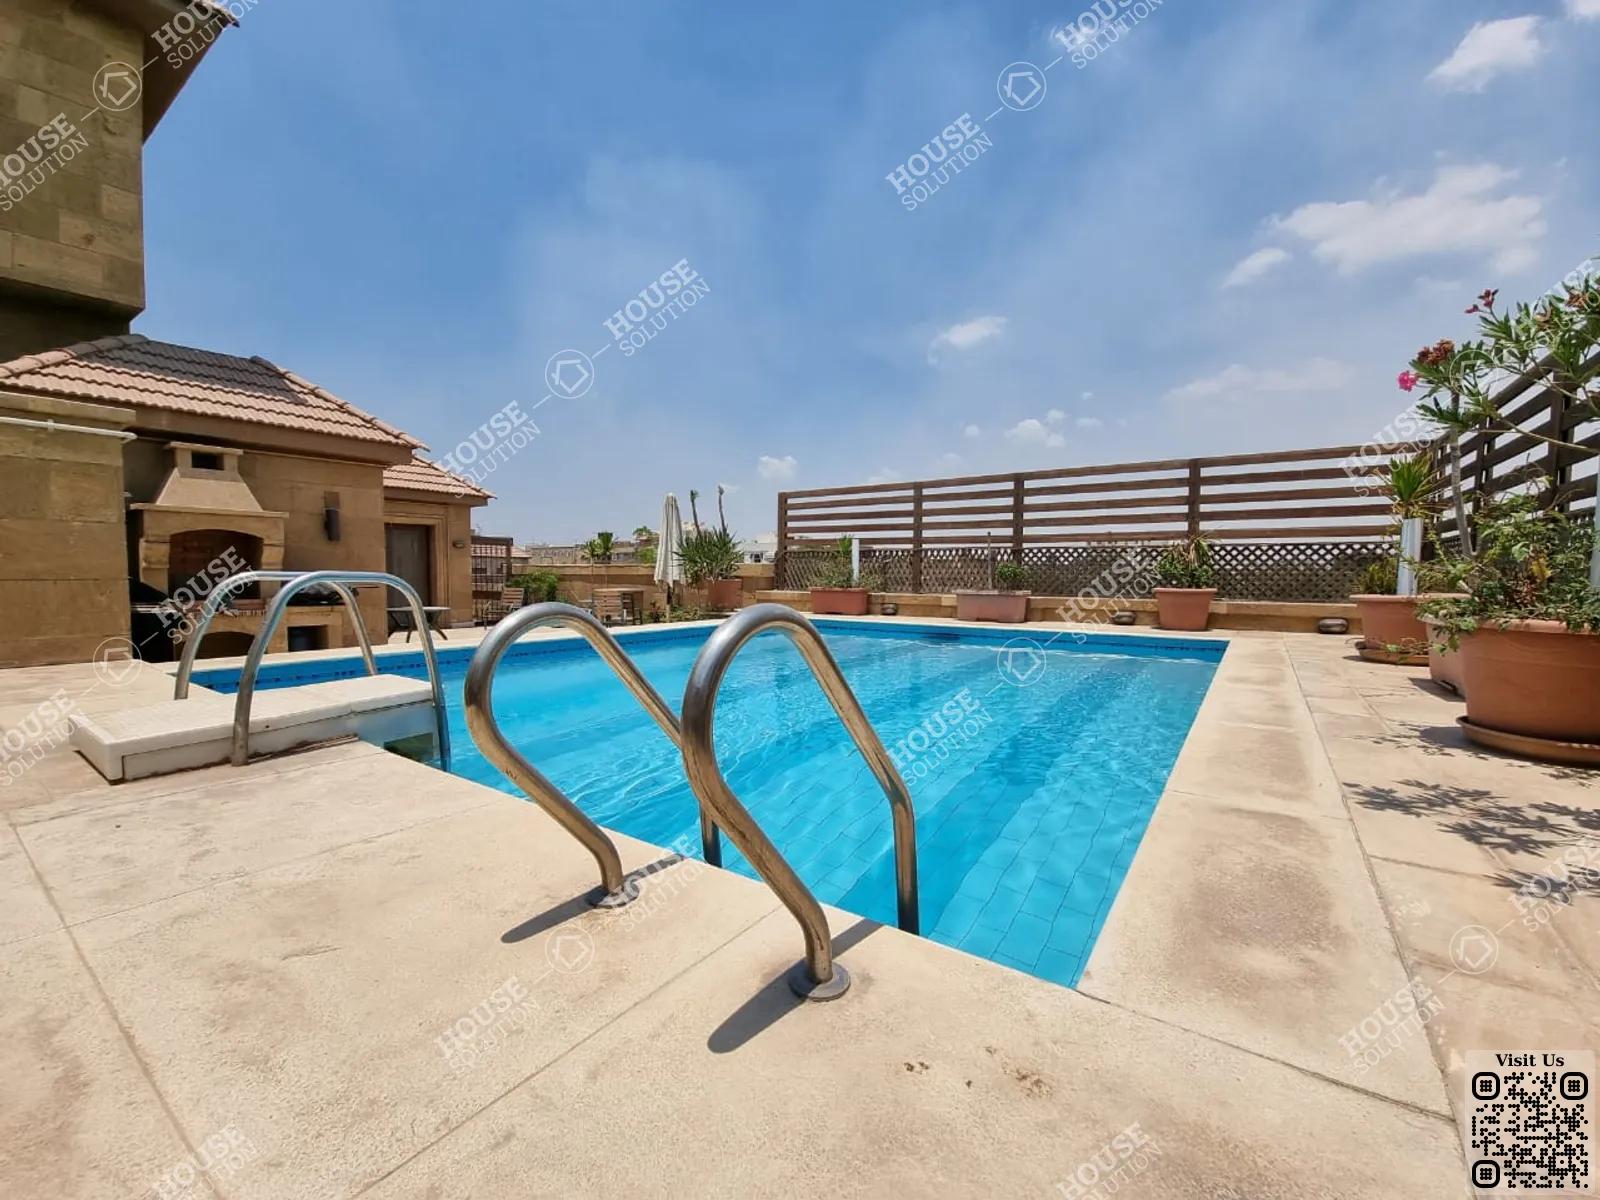 PRIVATE SWIMMING POOL  @ Penthouses For Rent In Maadi Maadi Sarayat Area: 500 m² consists of 4 Bedrooms 4 Bathrooms Modern furnished 5 stars #5520-0